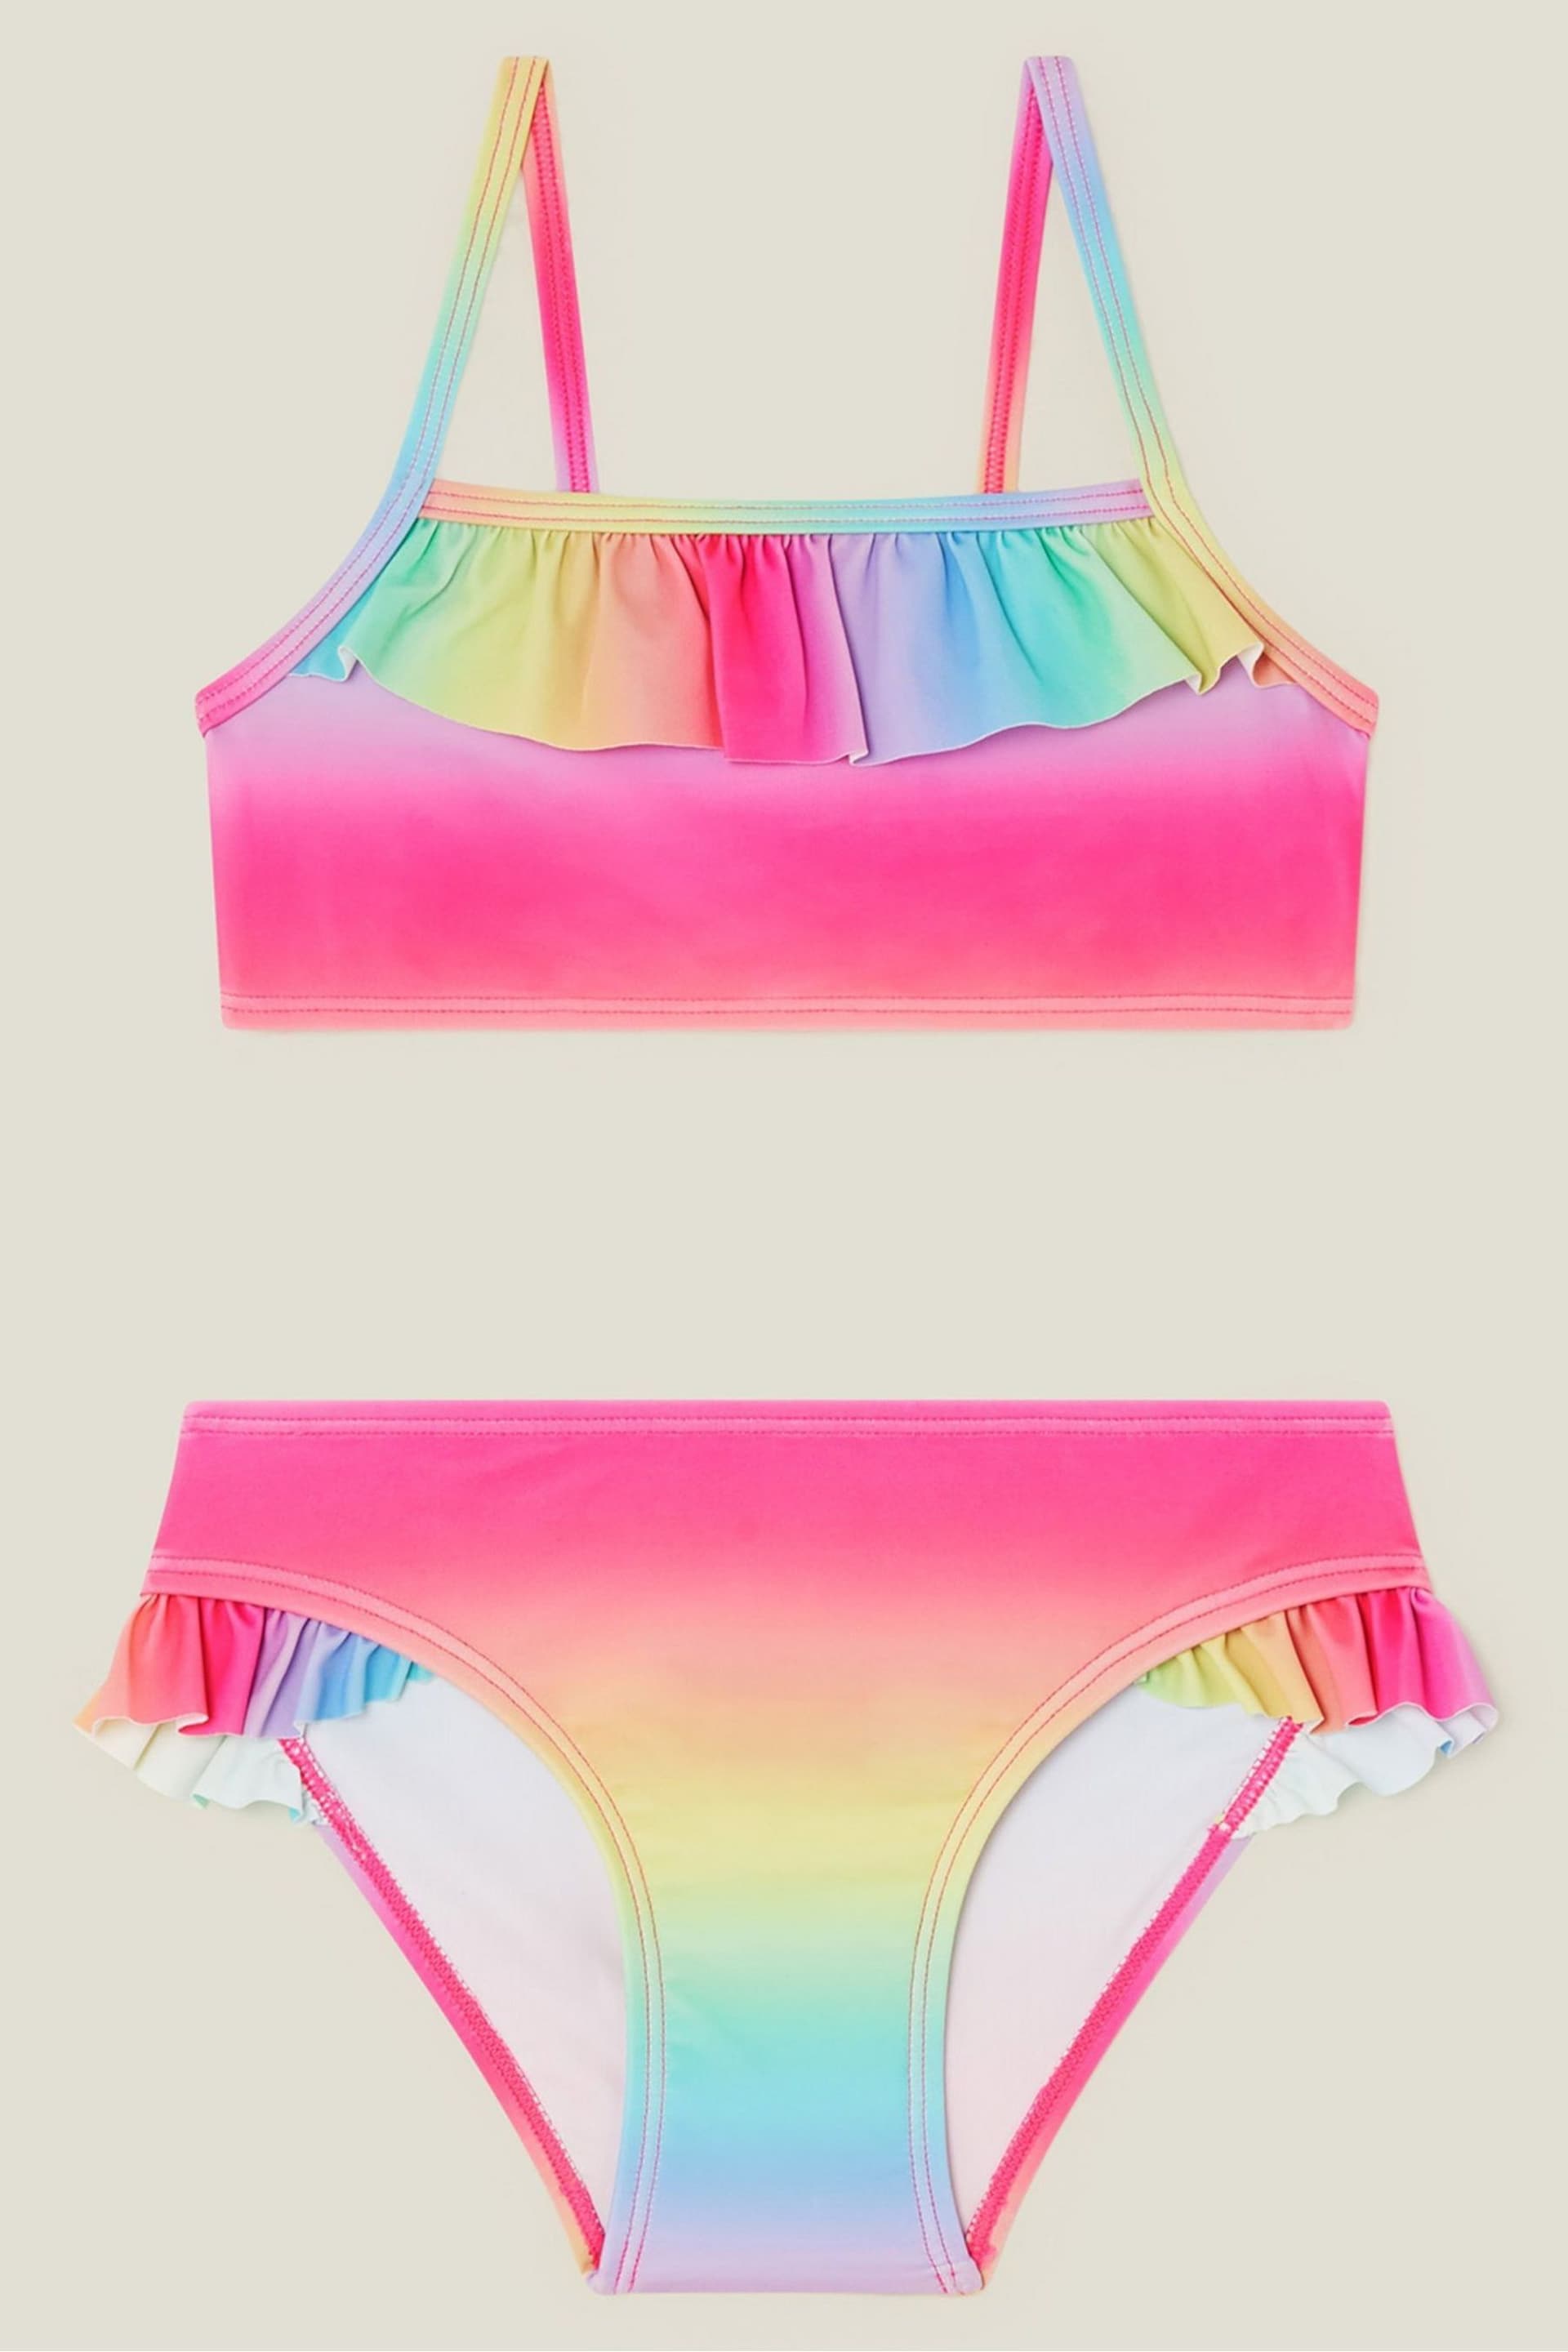 Angels By Accessorize Girls Pink Ombre Bikini Set - Image 1 of 1